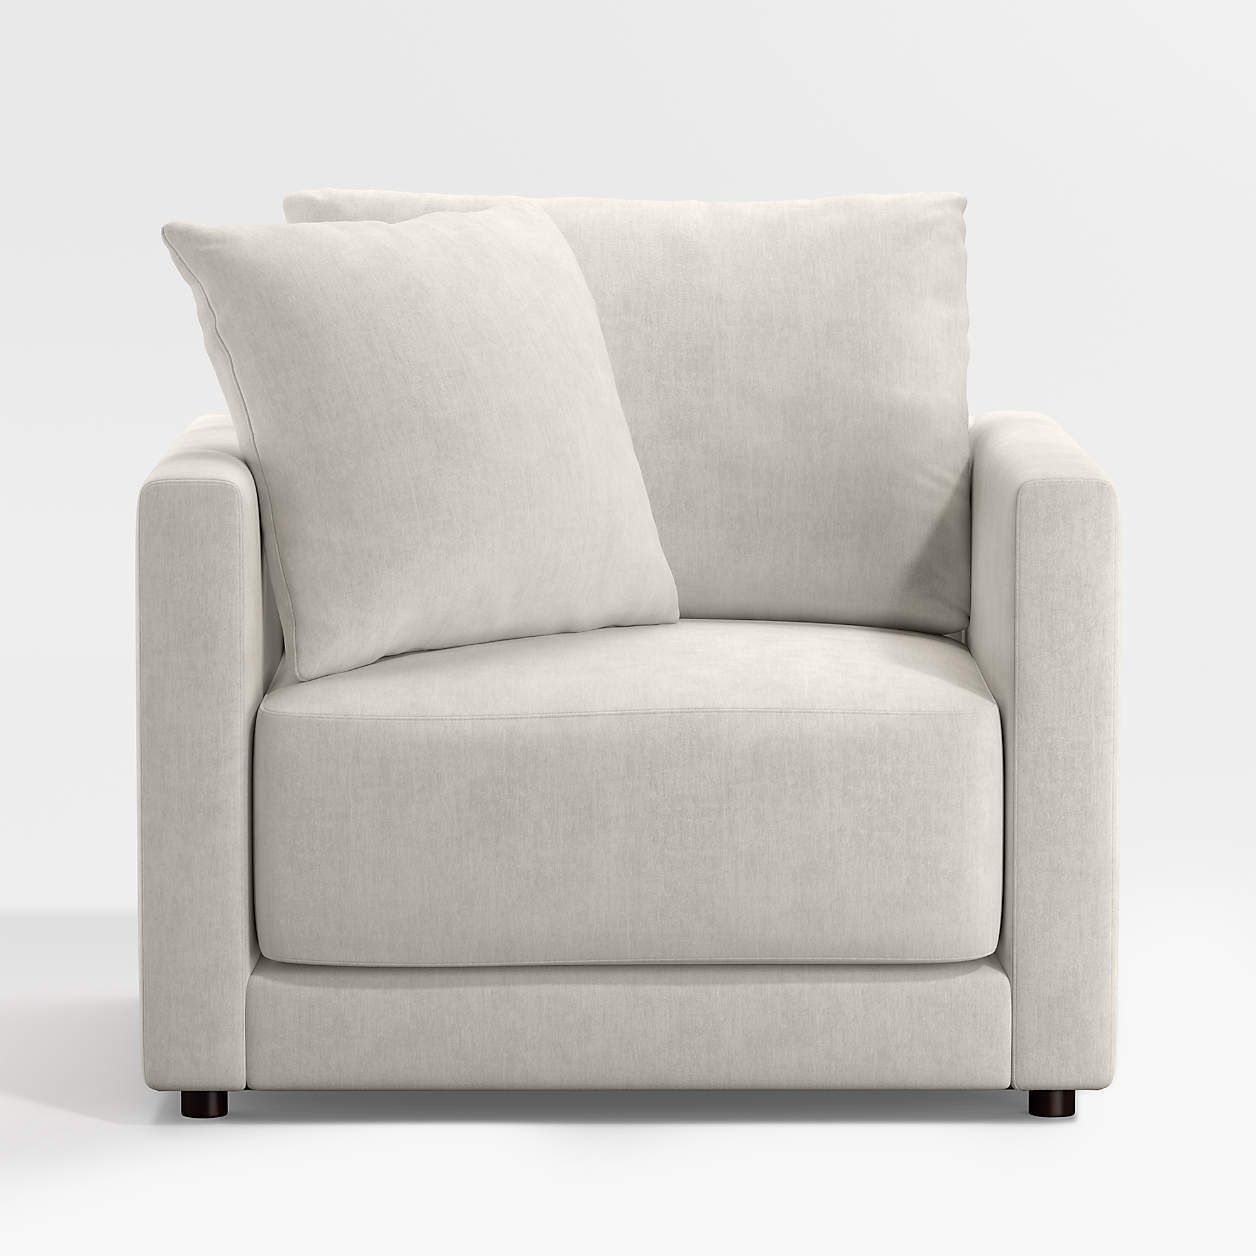 Gather Petite Chair + Reviews | Crate and Barrel | Crate & Barrel